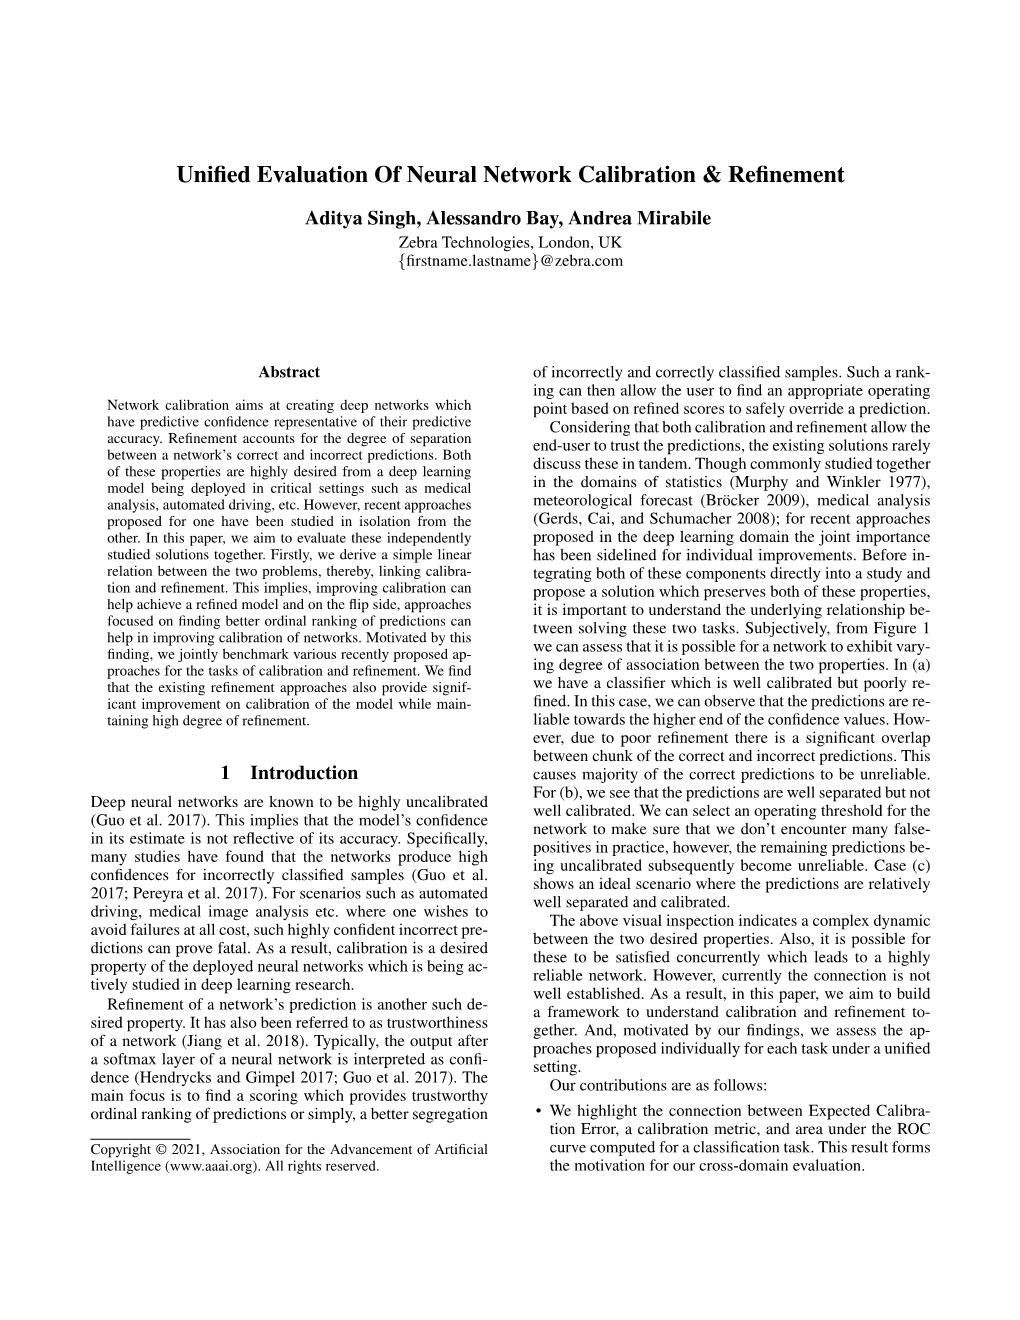 Unified Evaluation of Neural Network Calibration & Refinement